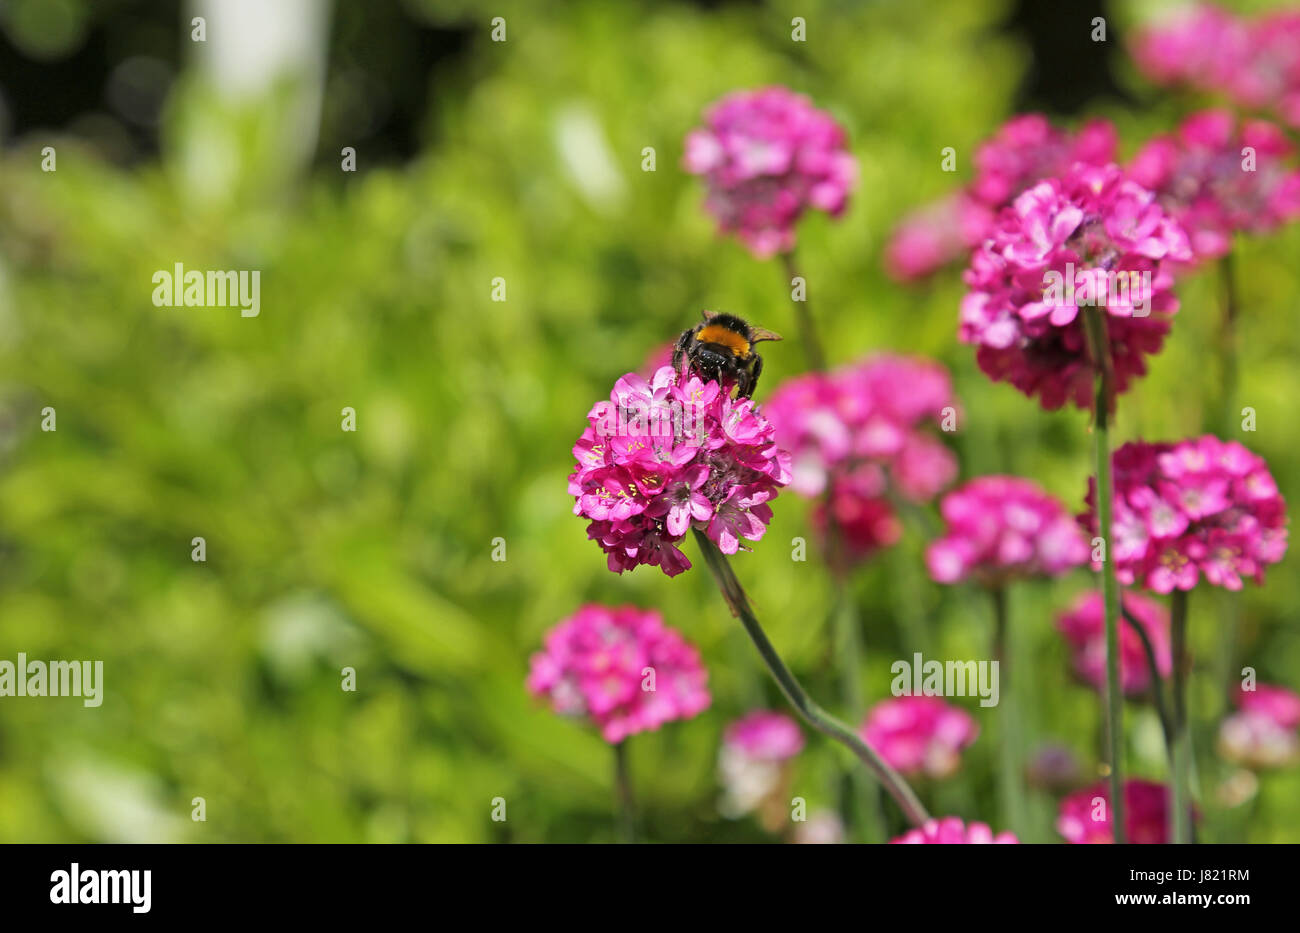 A bee collects pollen on an Armada Rose plant (Armeria Maritima) in a south London garden, UK Stock Photo